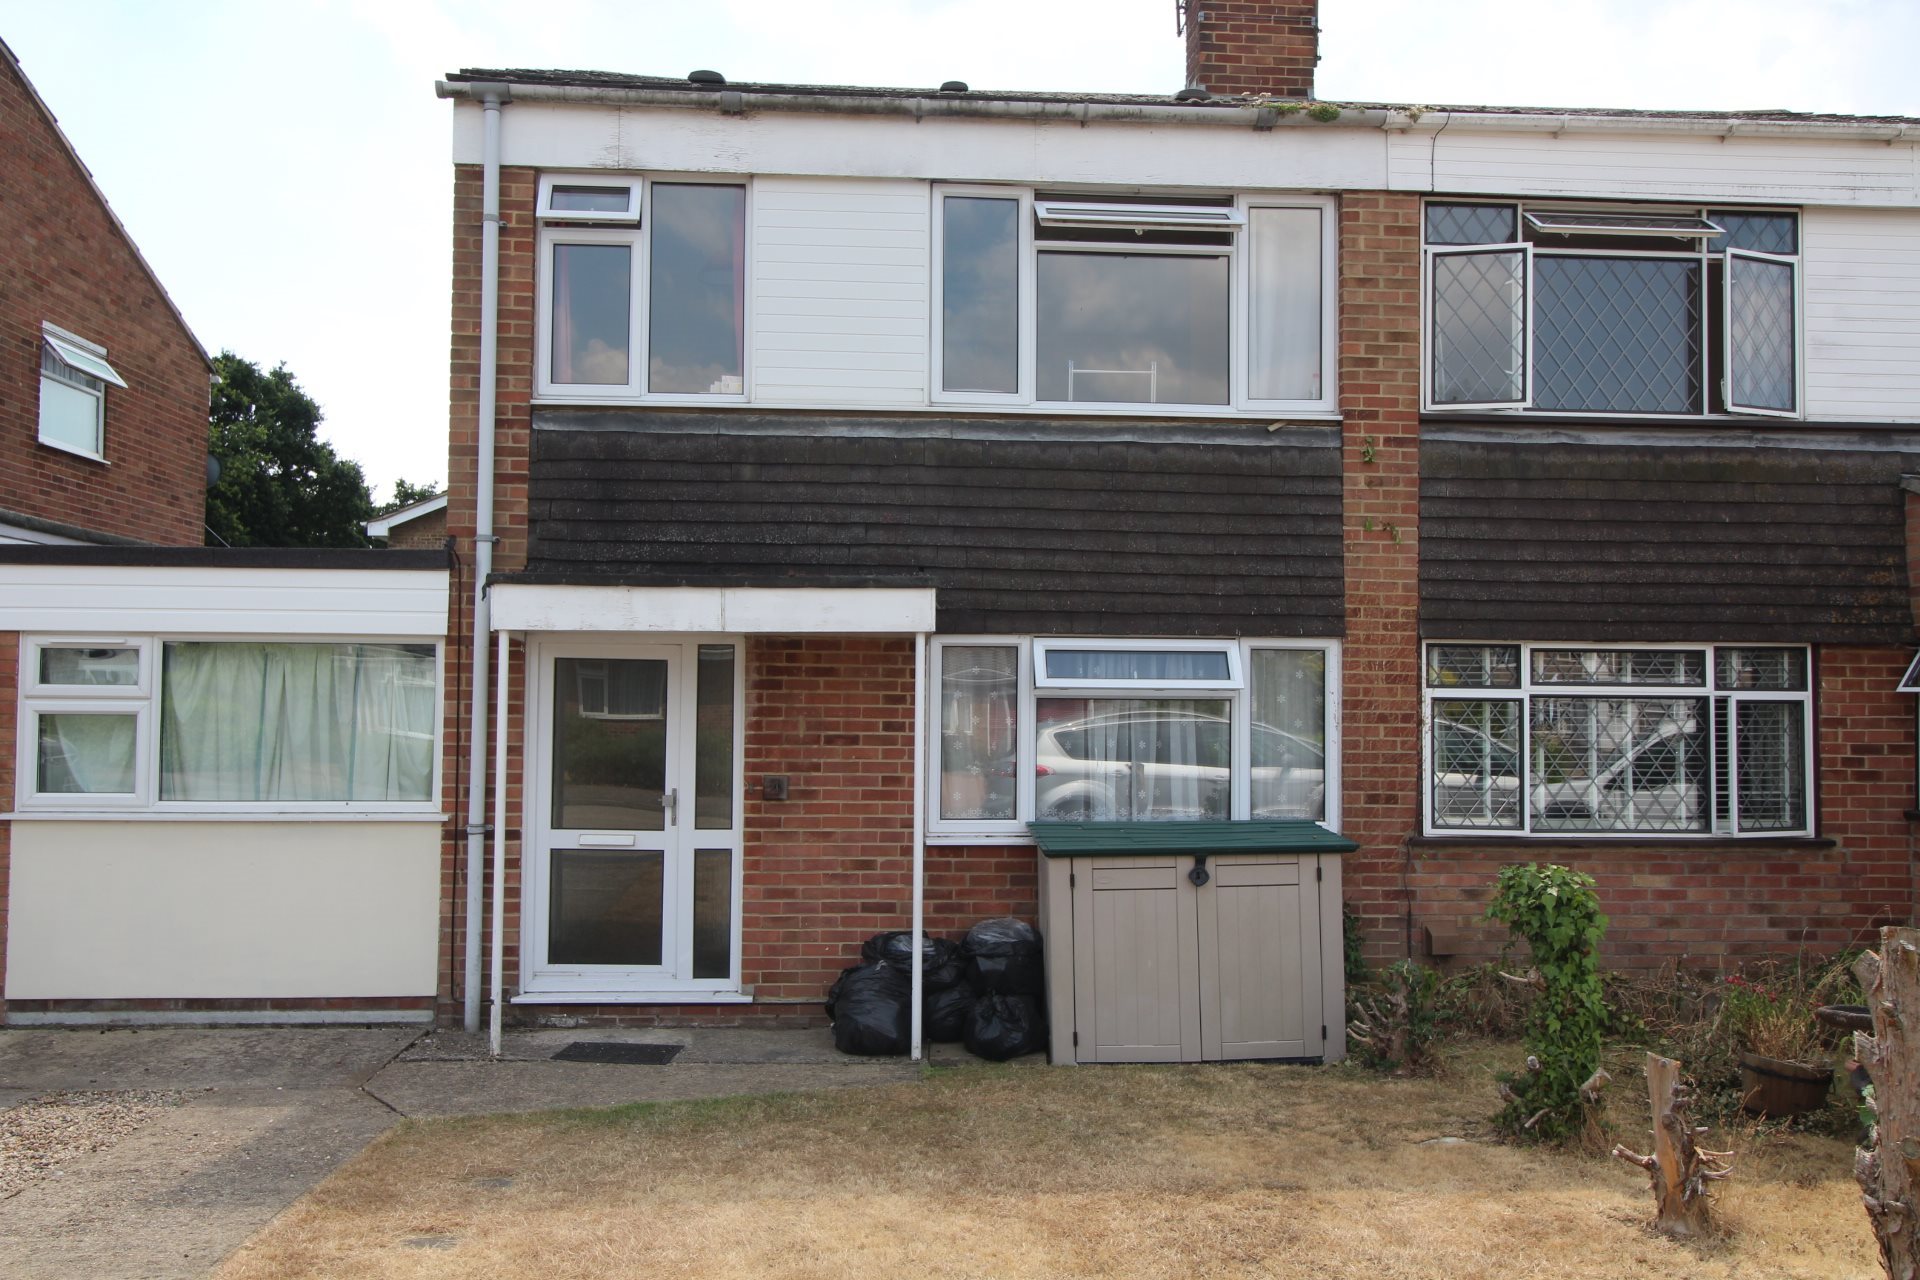 1 bed house / flat share to rent in Petworth Close, Wivenhoe - Property Image 1